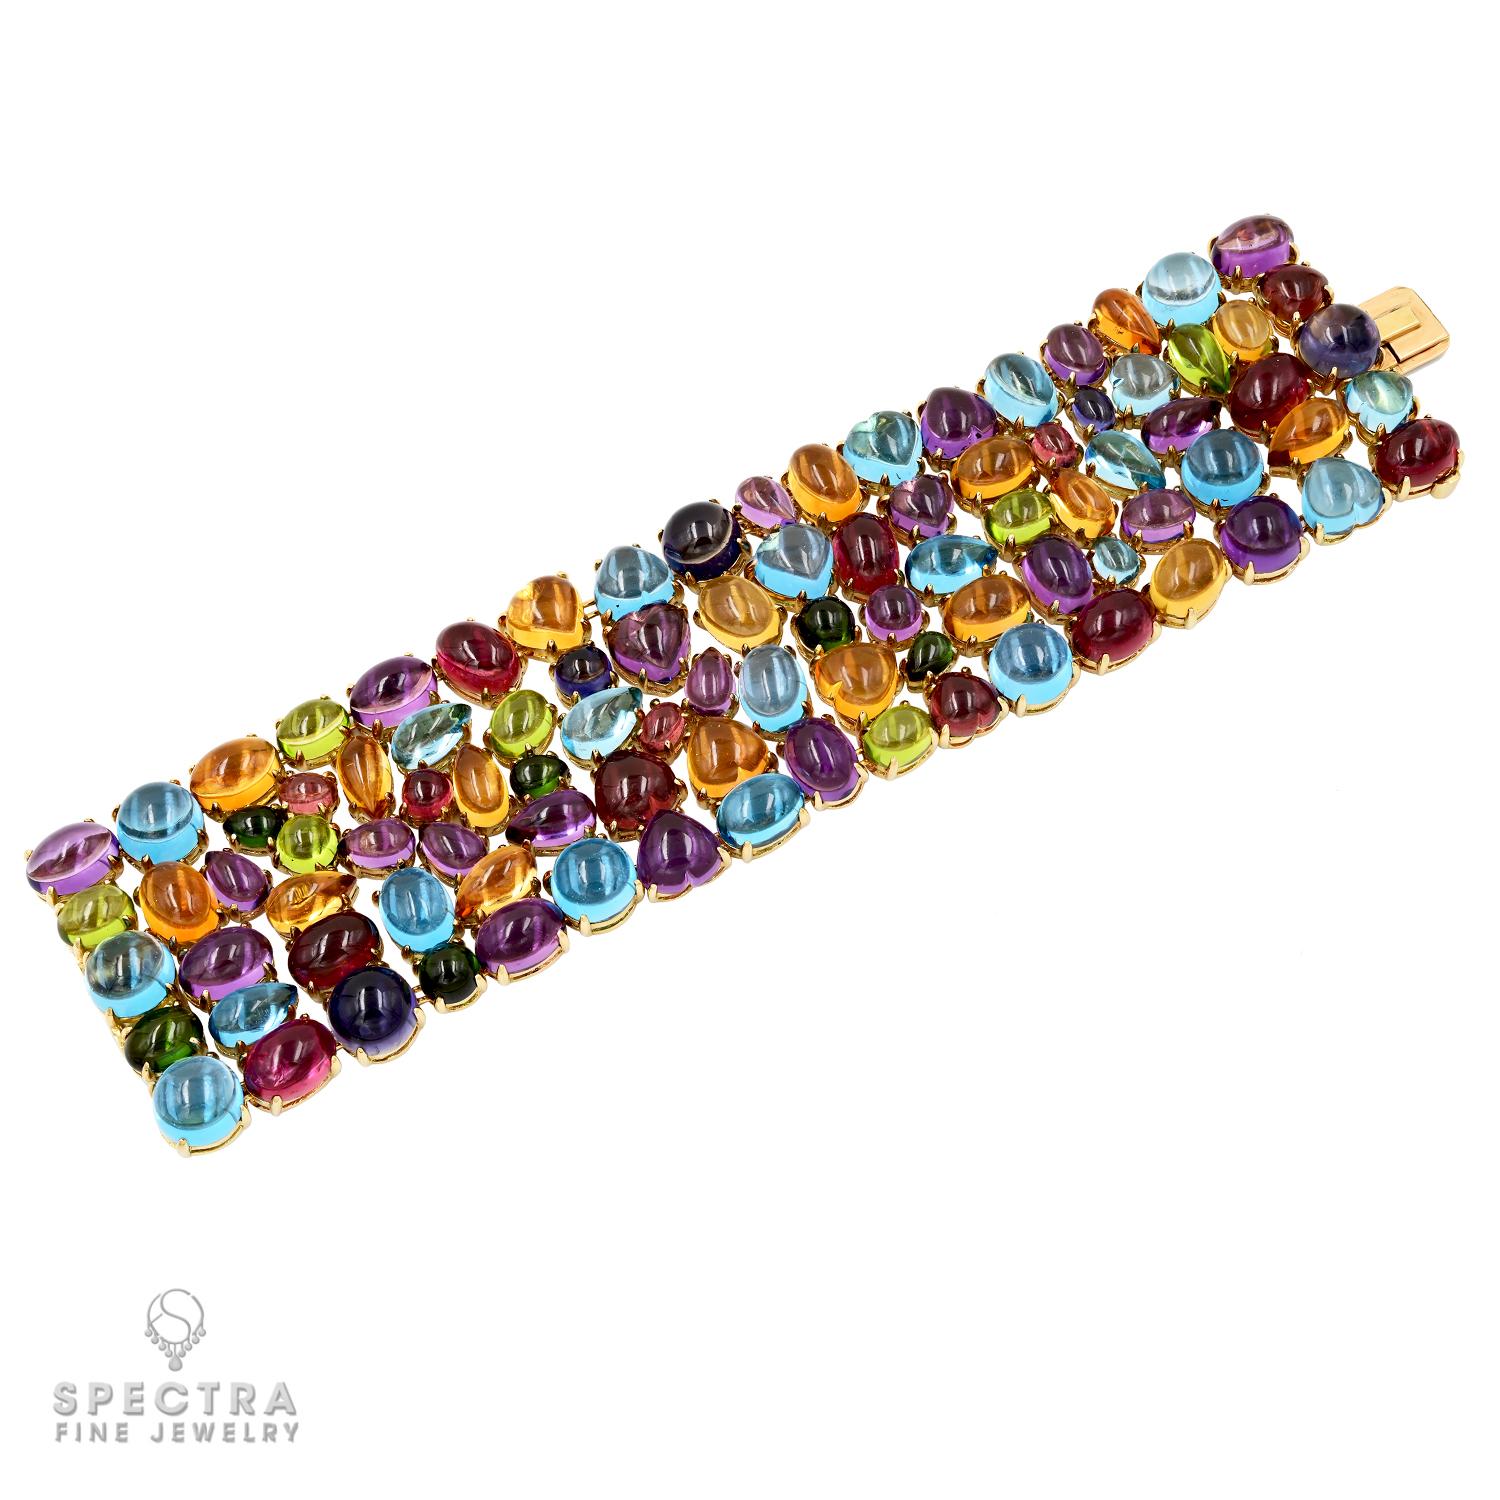 Step into a world of unparalleled elegance with the Bulgari Multi-Gem Allegra Bracelet, a timeless masterpiece reminiscent of the opulence and sophistication of the early 2000s. Crafted circa 2003, this exquisite bracelet features a mesmerizing